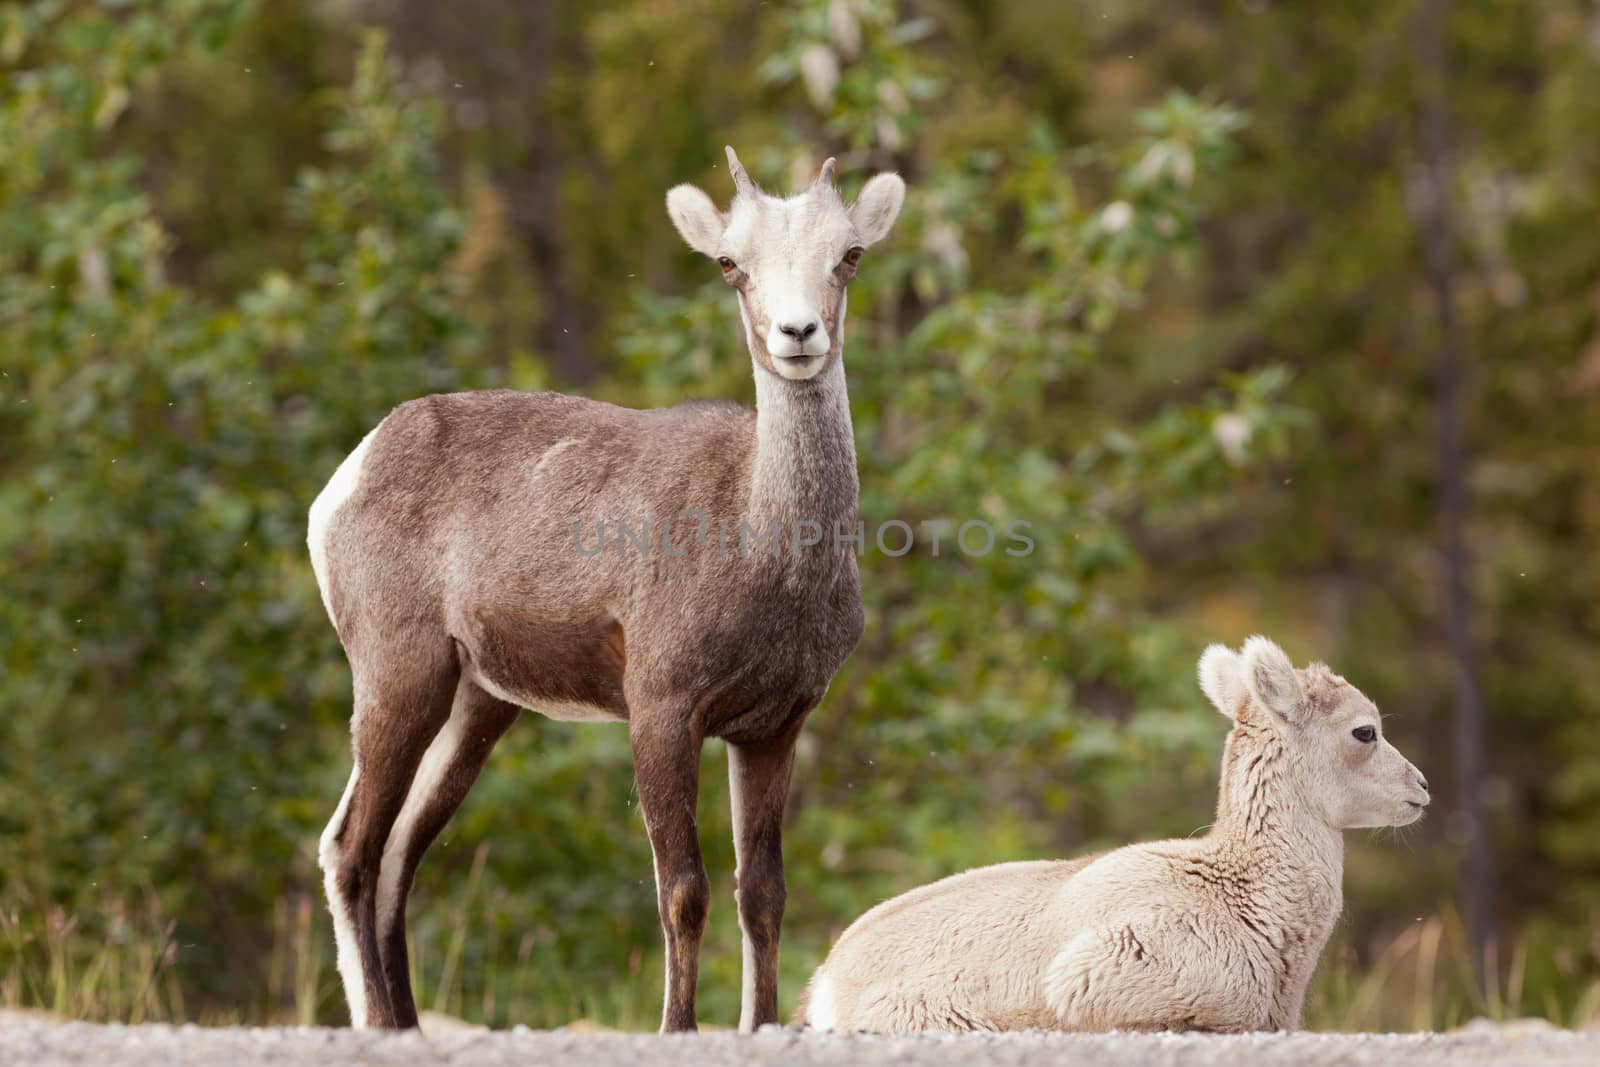 Two young Stone Sheep, Ovis dalli stonei, or thinhorn sheep resting and watching, wildlife of northern Canadian Rocky Mountains, British Columbia, Canada